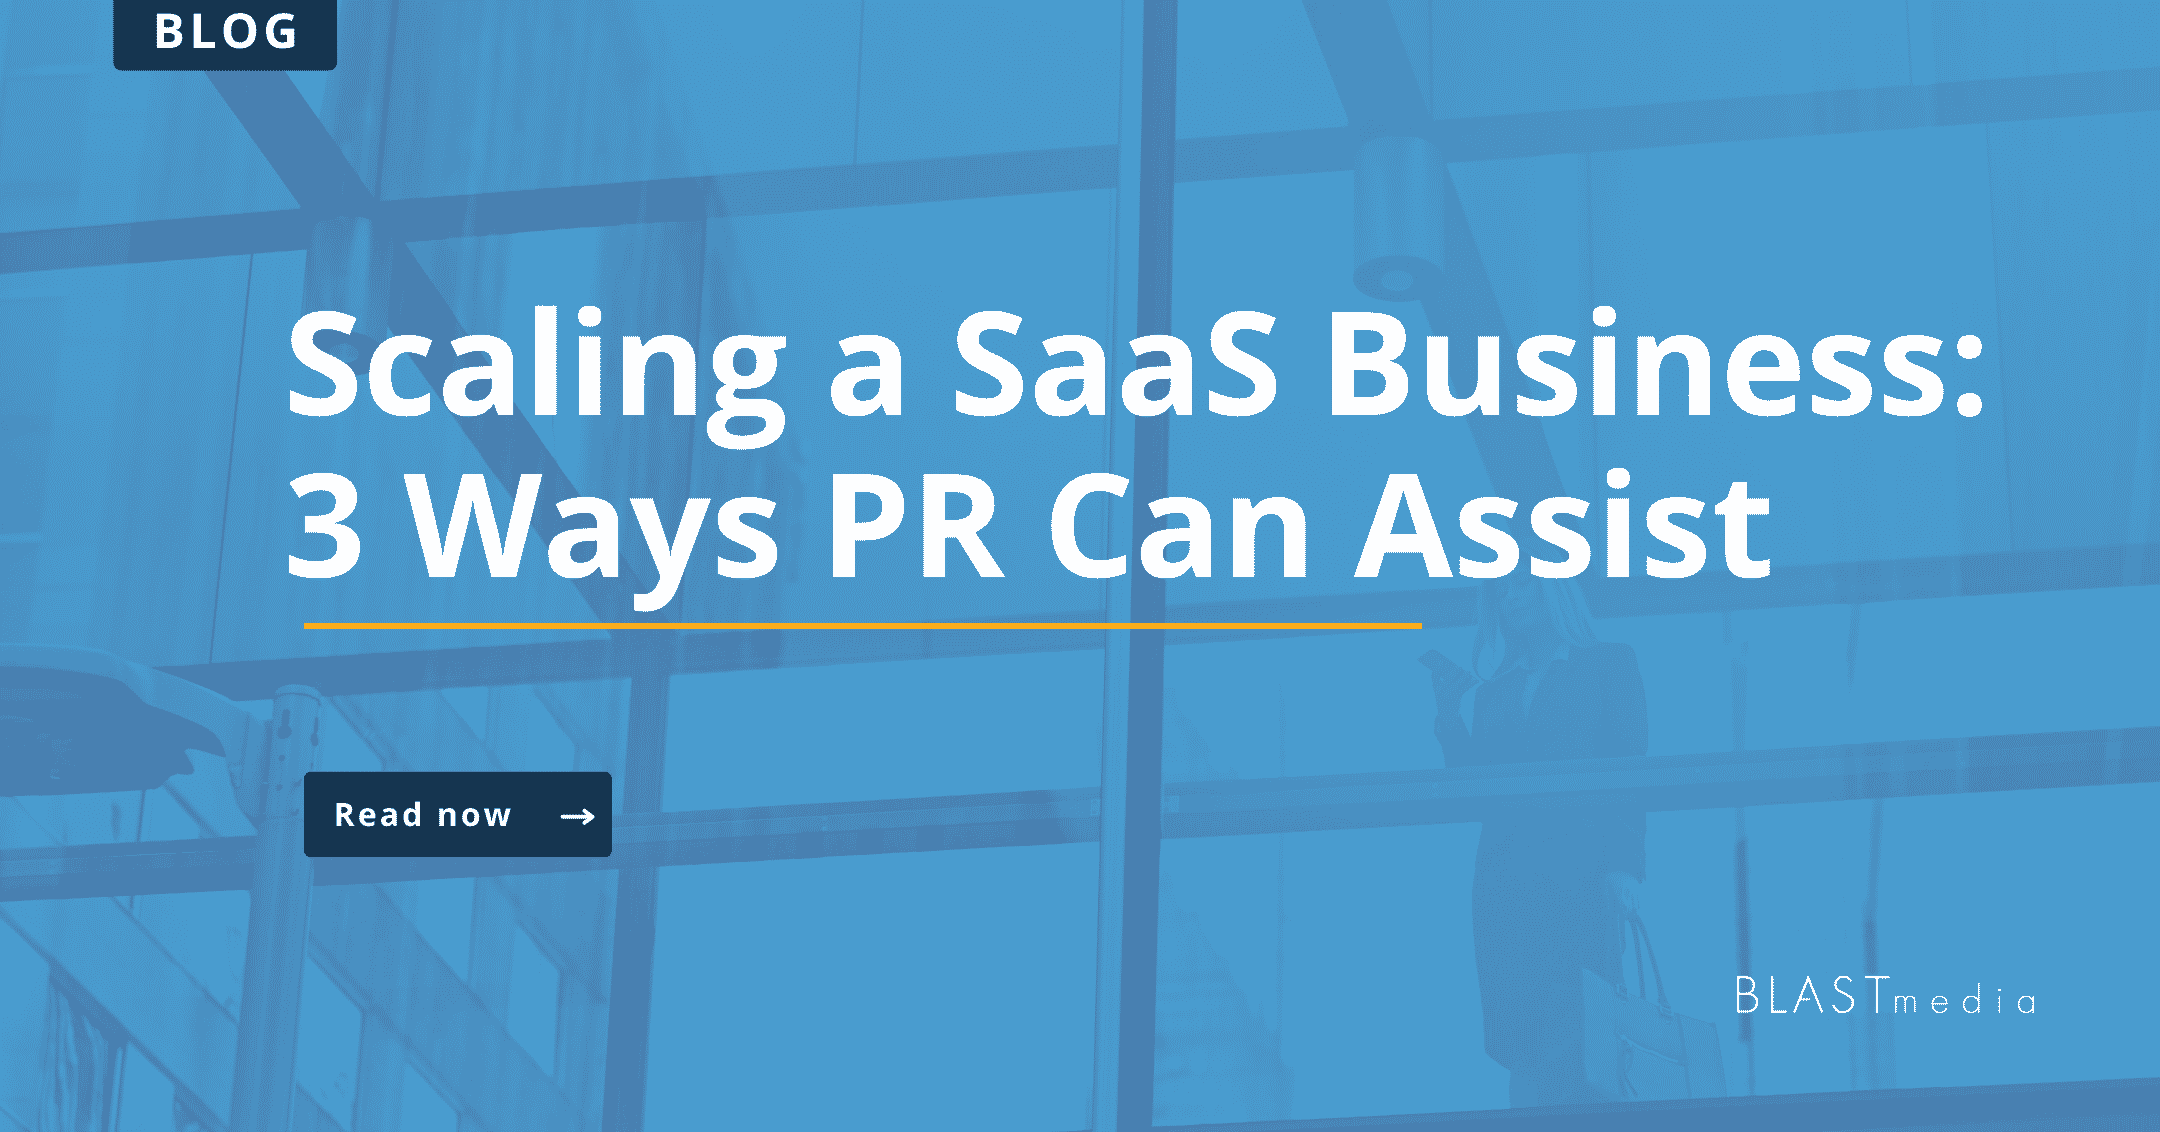 Scaling a SaaS Business: 3 Ways PR Can Assist